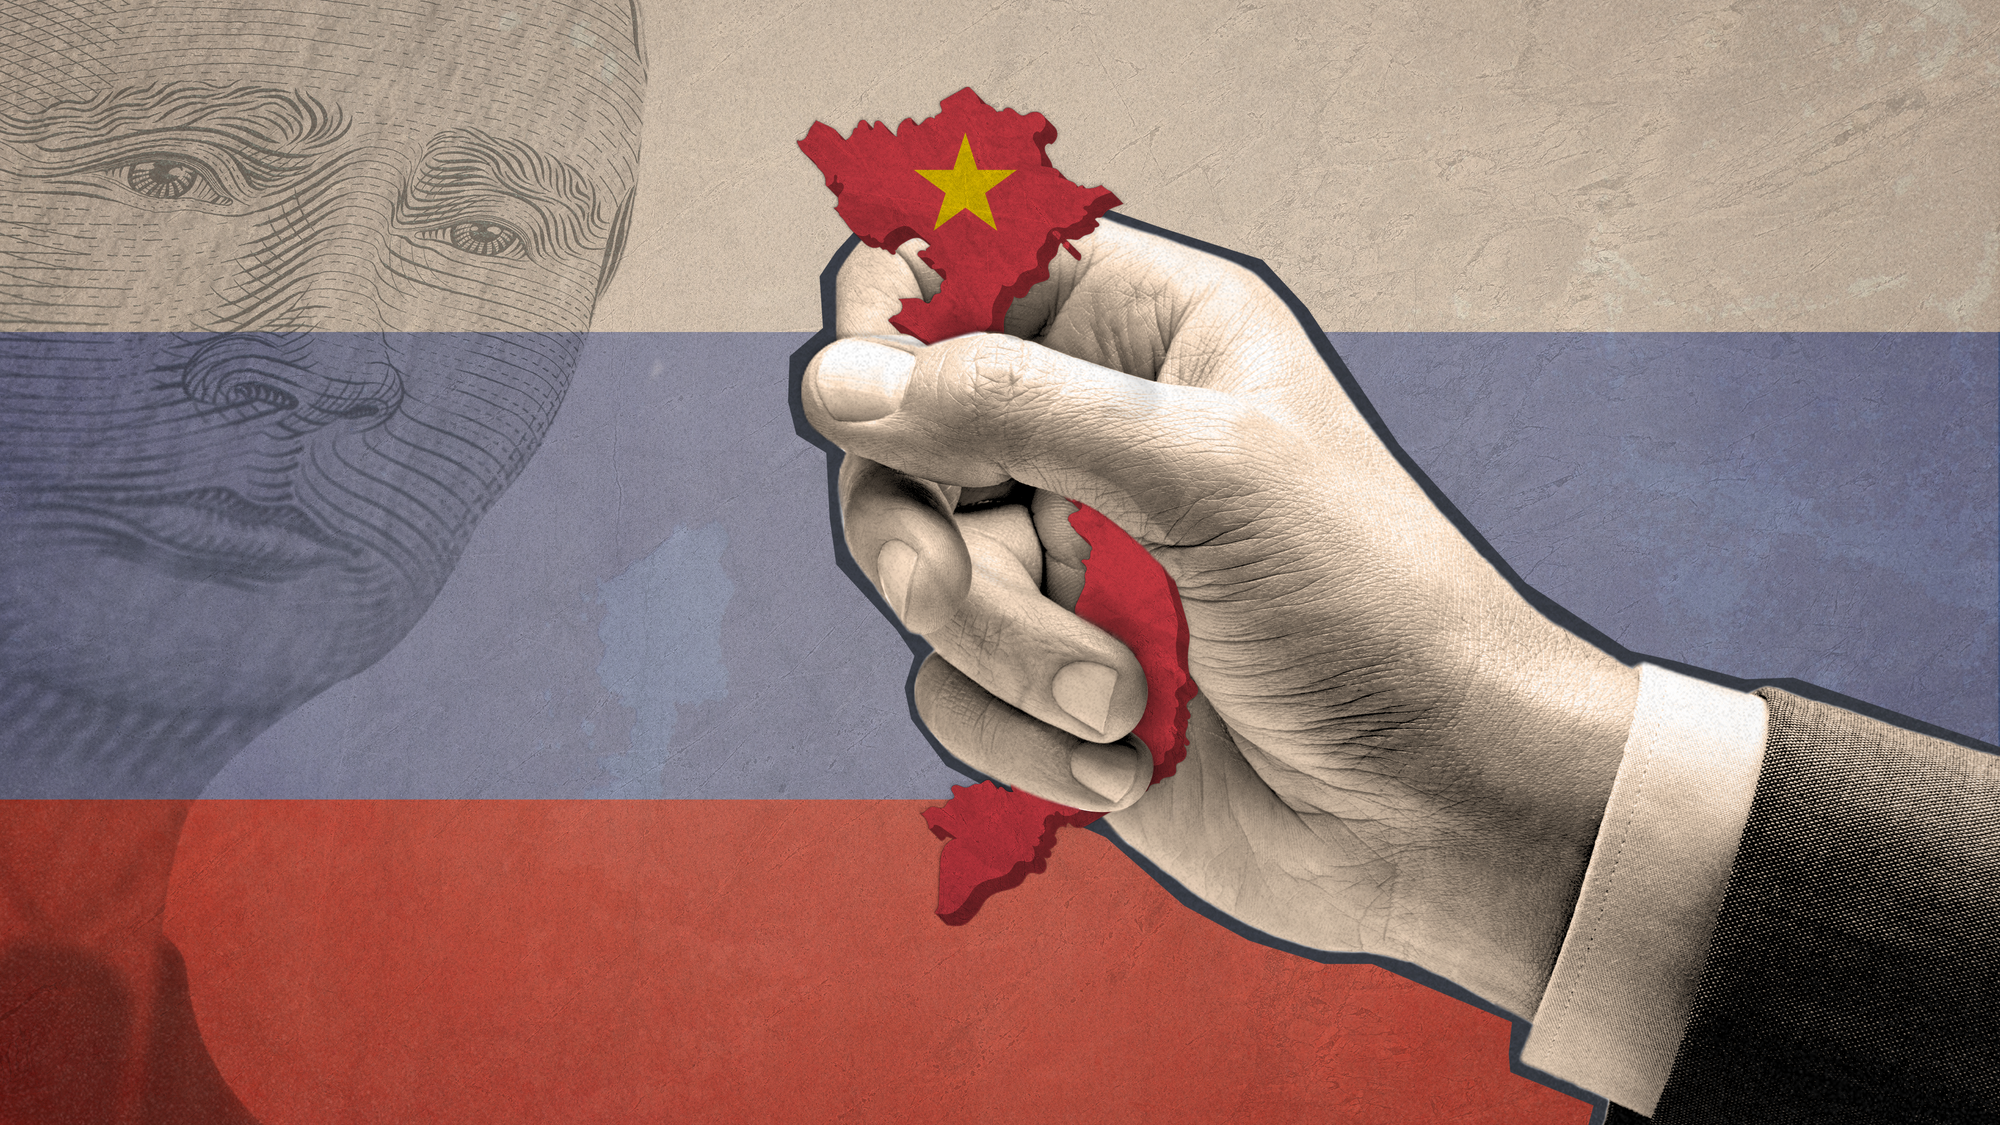 LIV's Trinh Huu Long in Southeast Asia Globe: Vietnam and the Russian ties that bind them